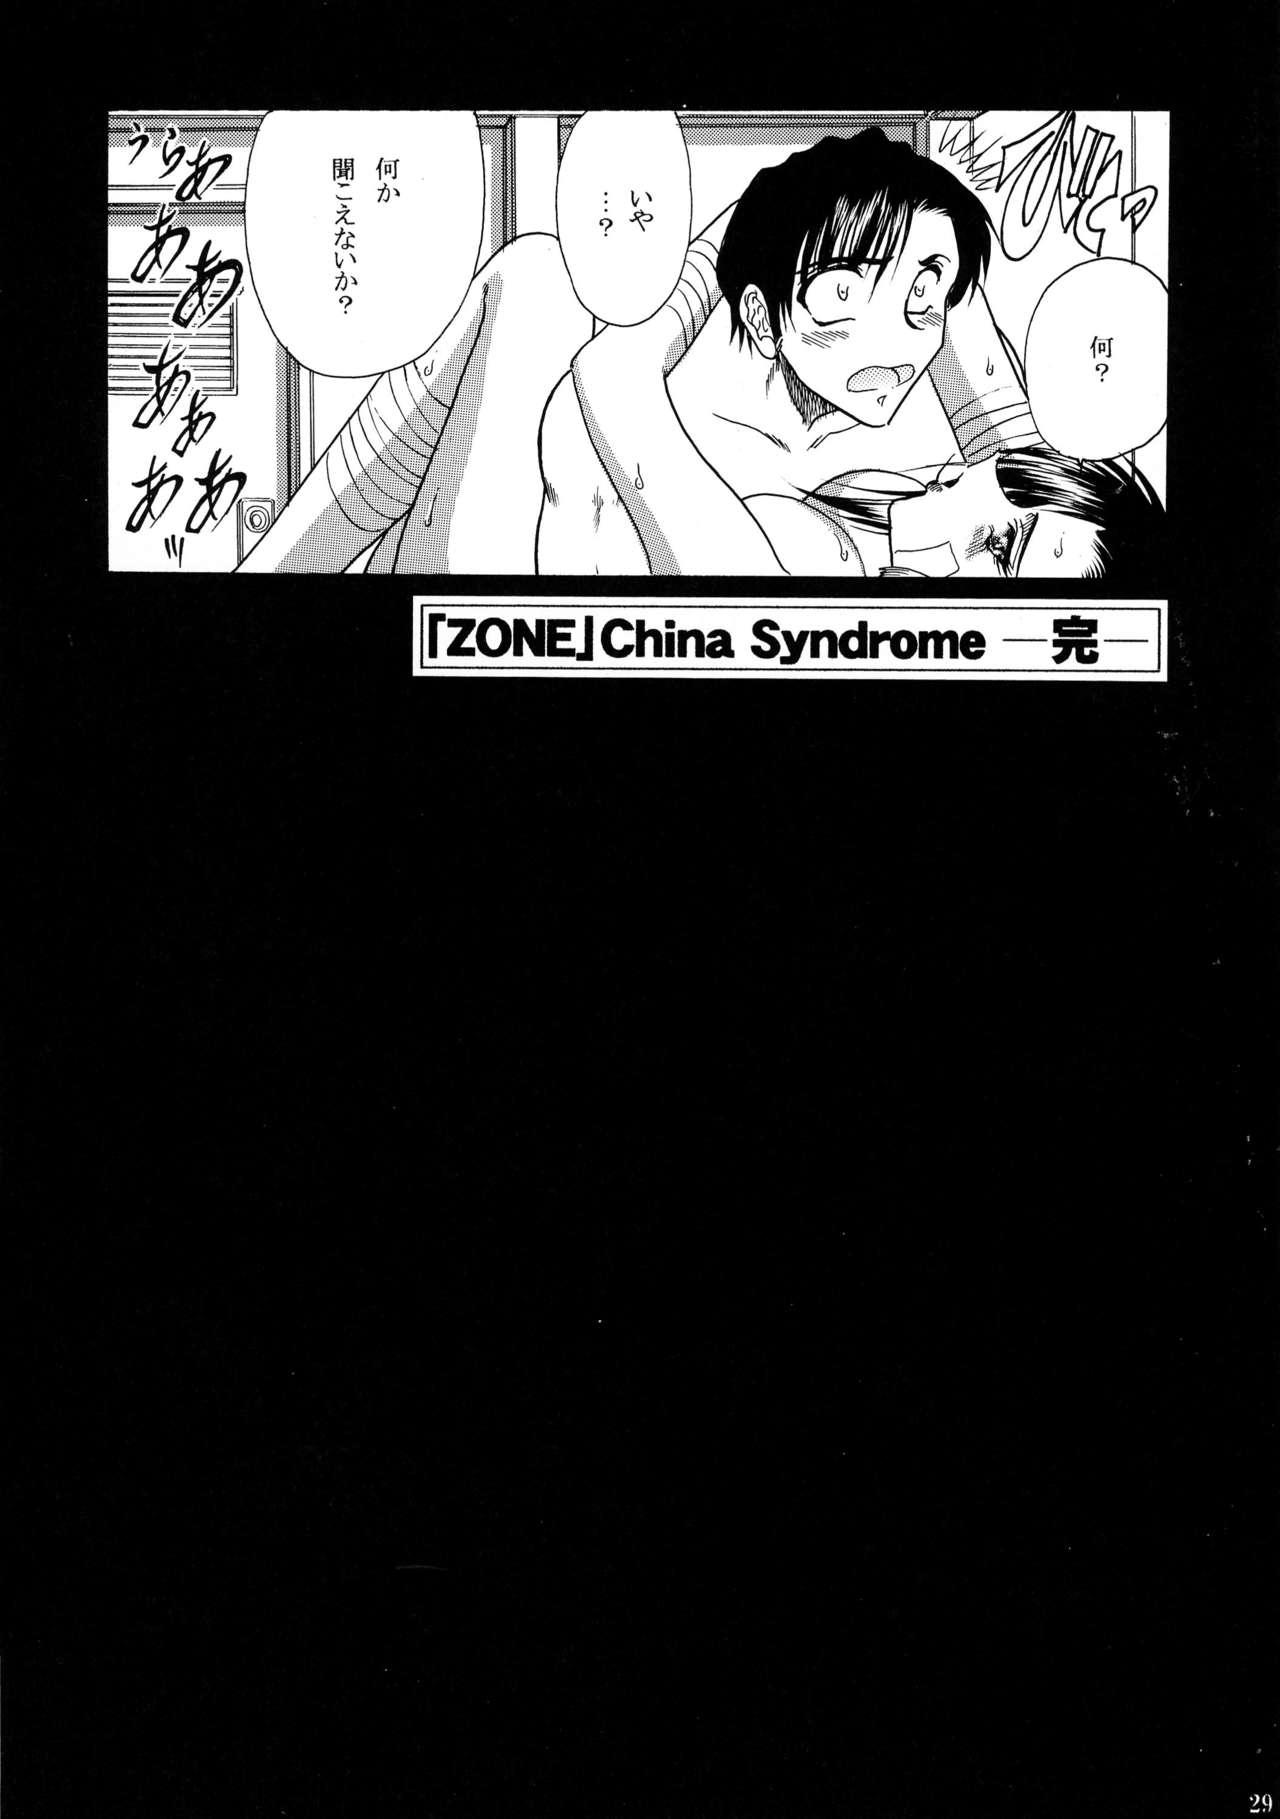 Best Blowjob ZONE 38 China Syndrome - Black lagoon Emo - Page 28